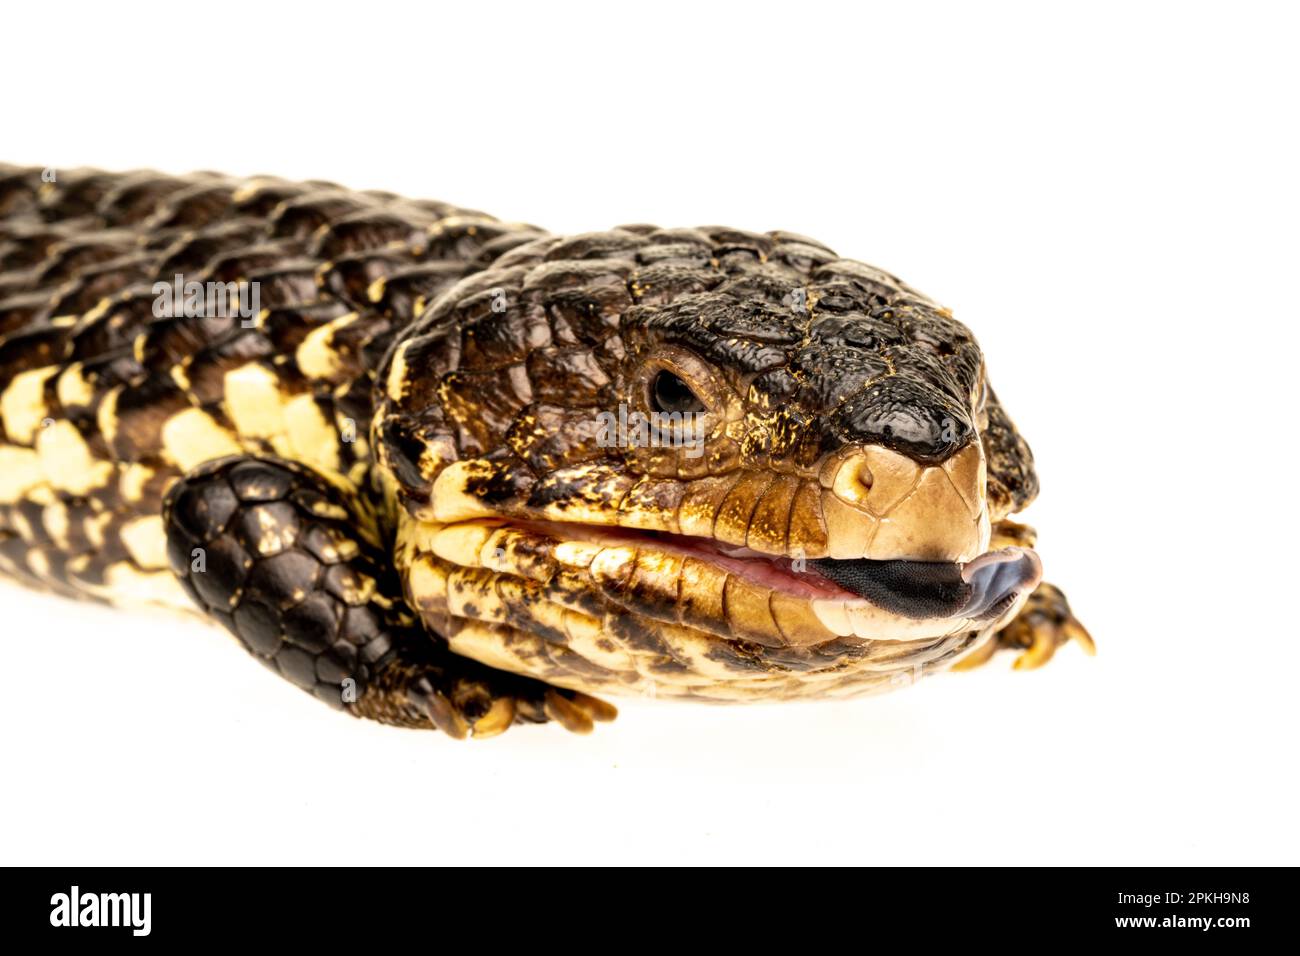 Blue-tongue Lizard on white background with tongue out and looking at the camera Stock Photo